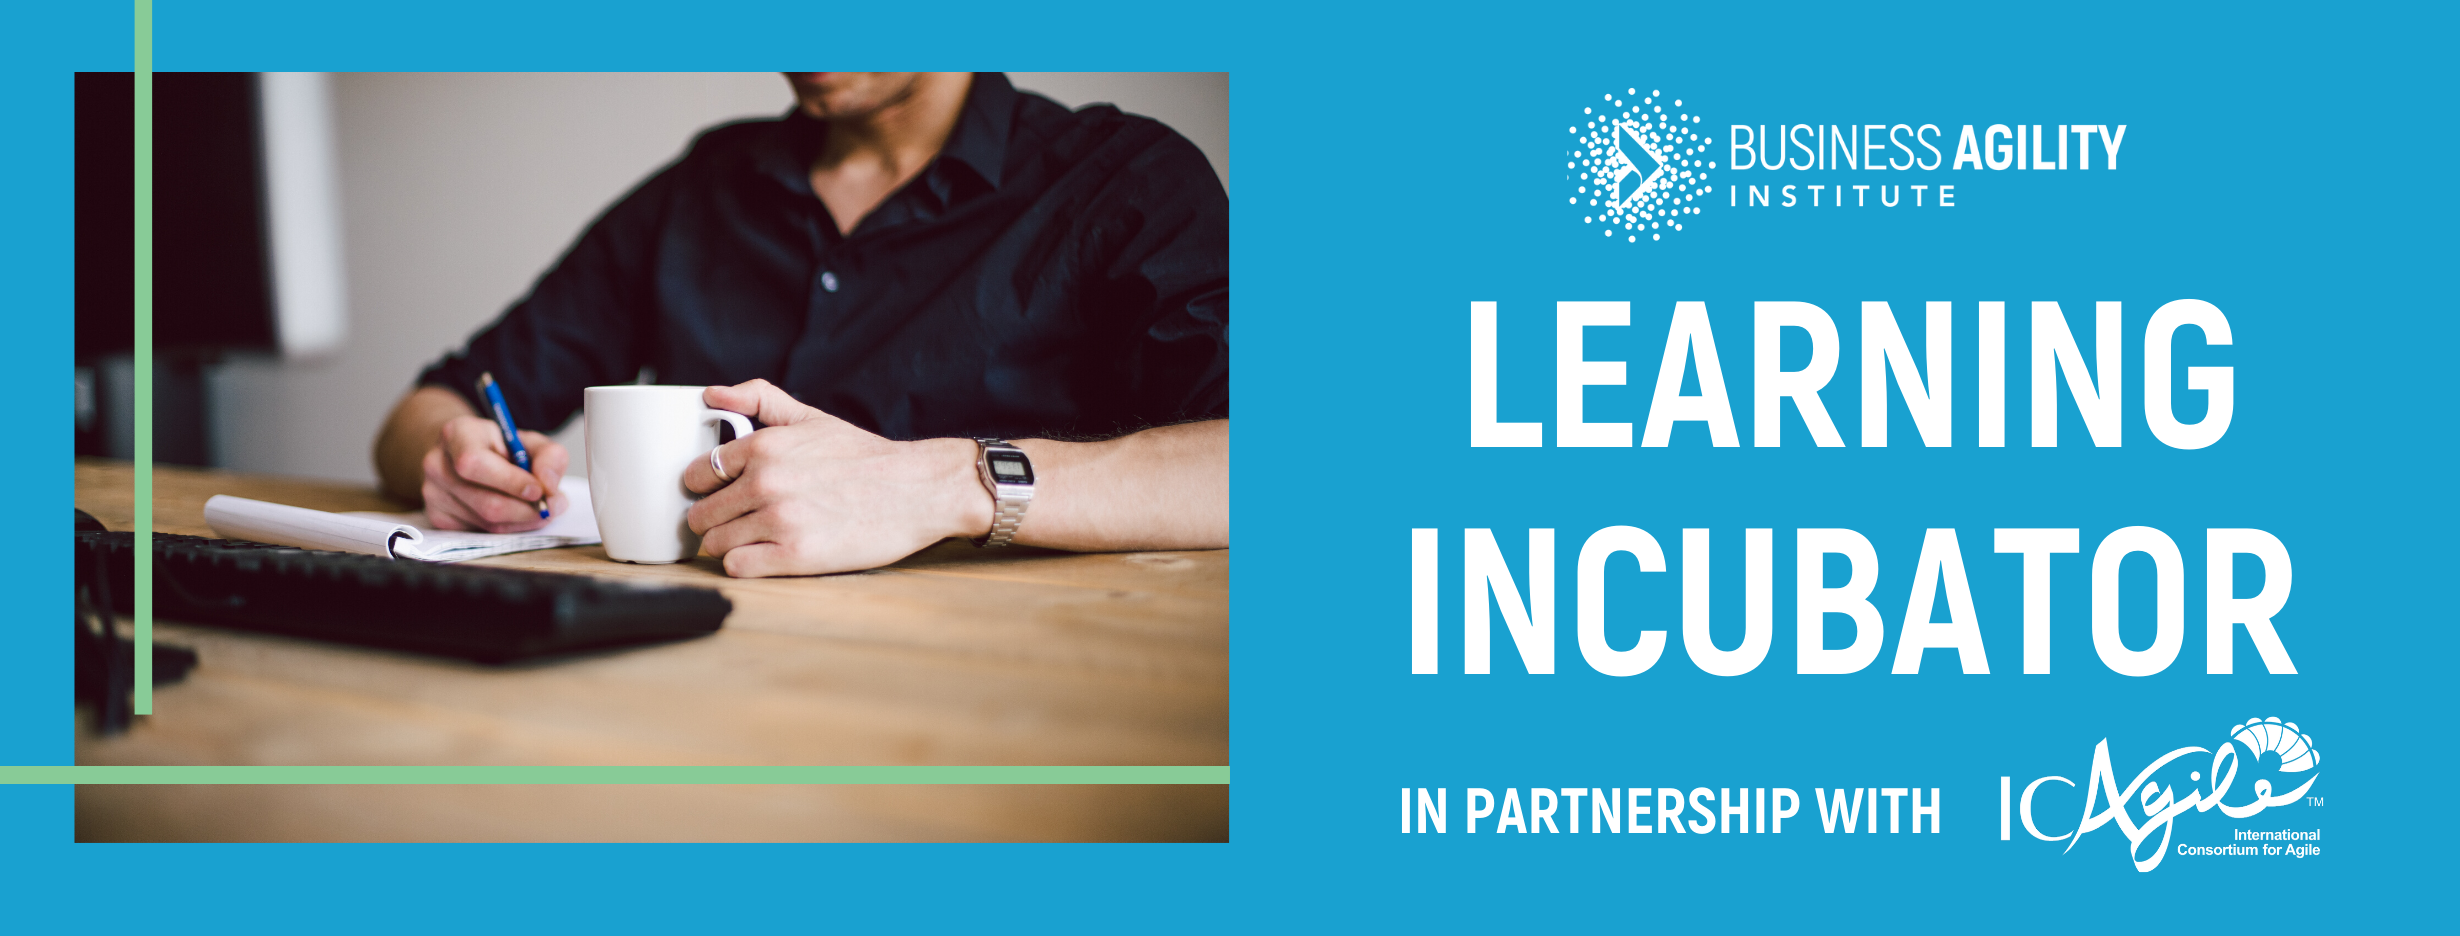 Business Agility Institute: Learning Incubator in partnership with IC Agile banner